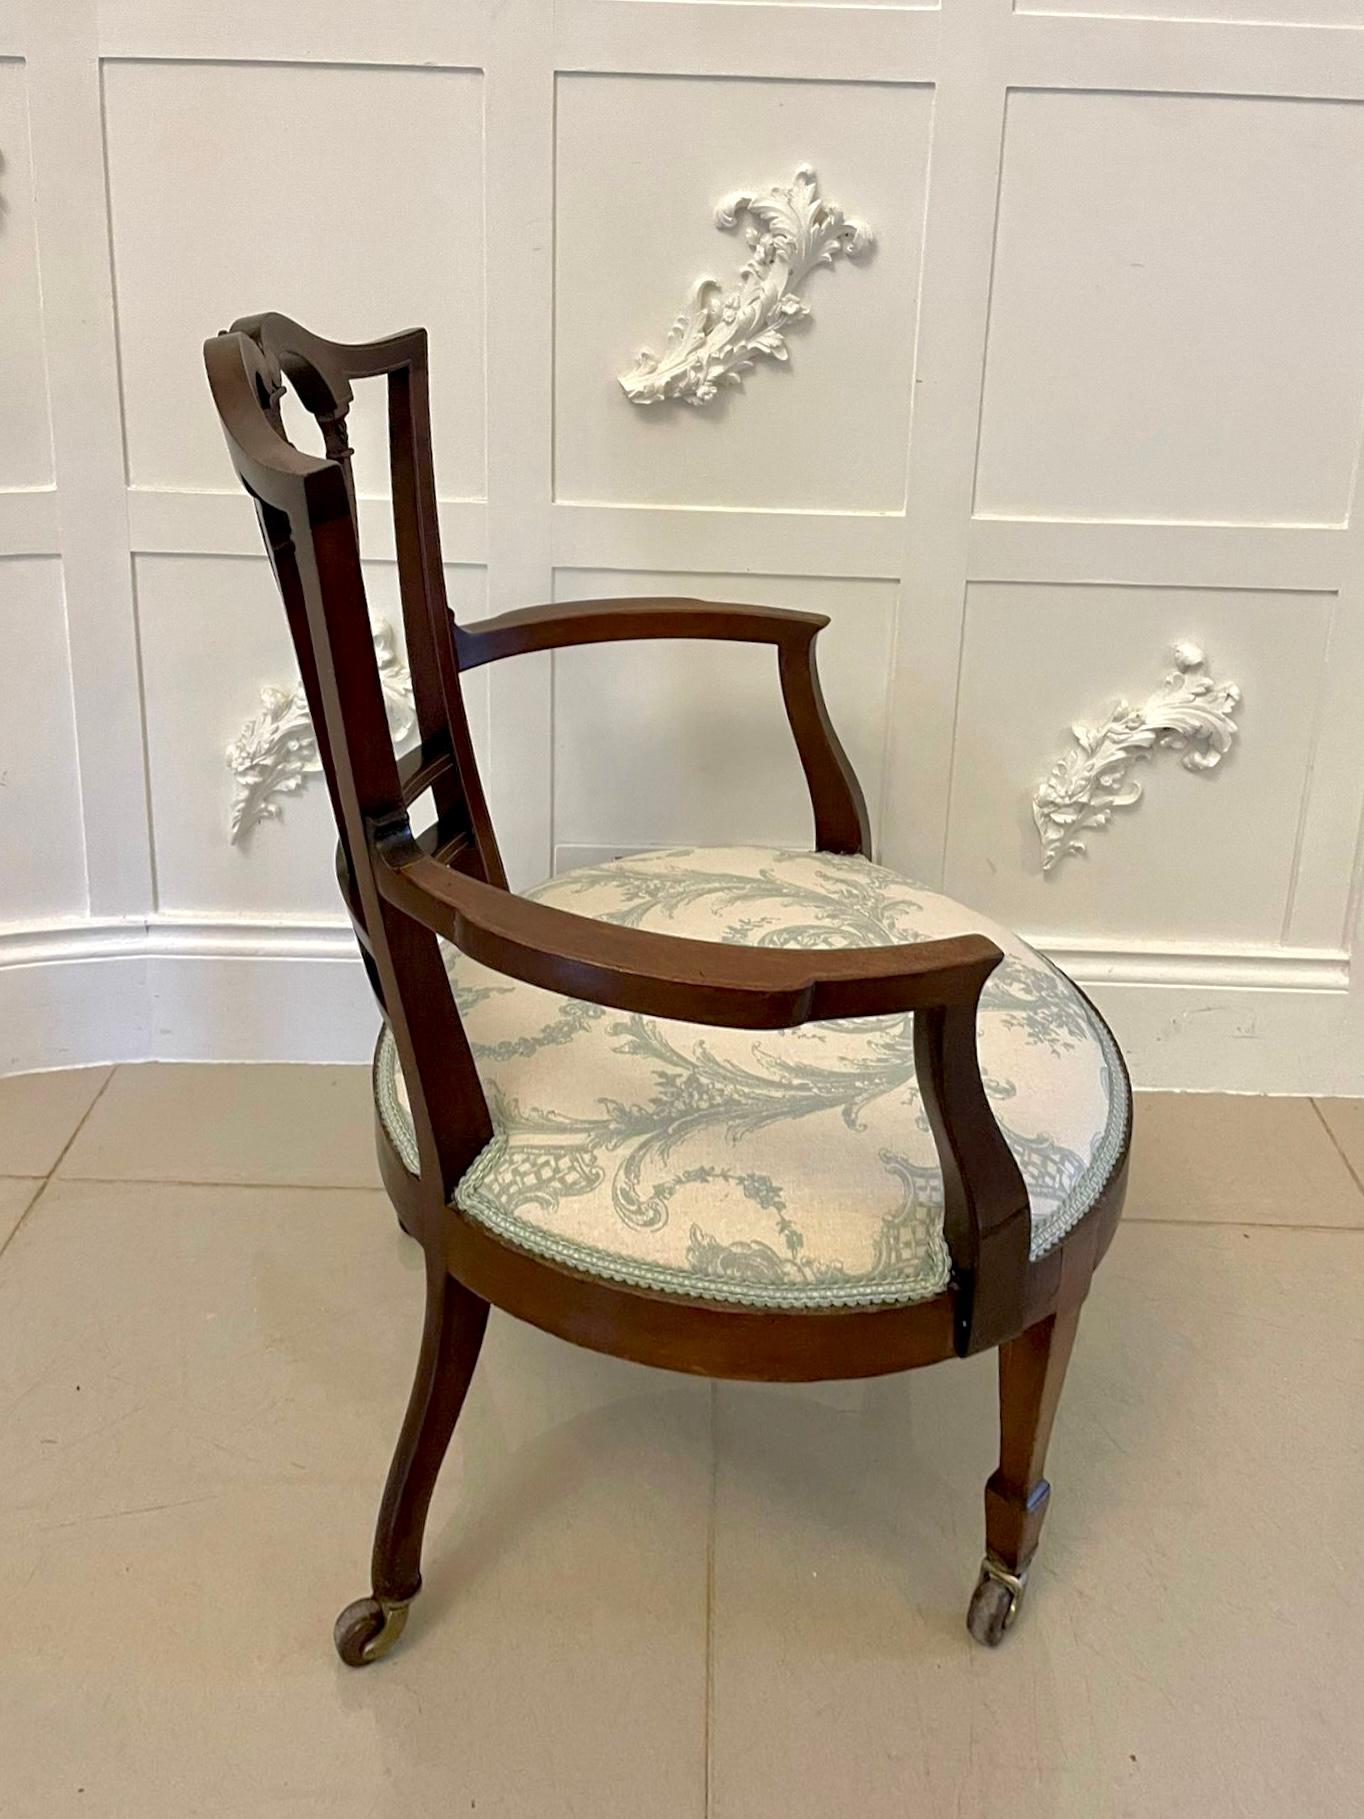 Antique Victorian inlaid mahogany armchair having a pretty inlaid shaped back and centre splat, shaped arms, standing on elegant inlaid square tapering legs with spade feet to the front and shaped back legs with original castors

A quaint chair